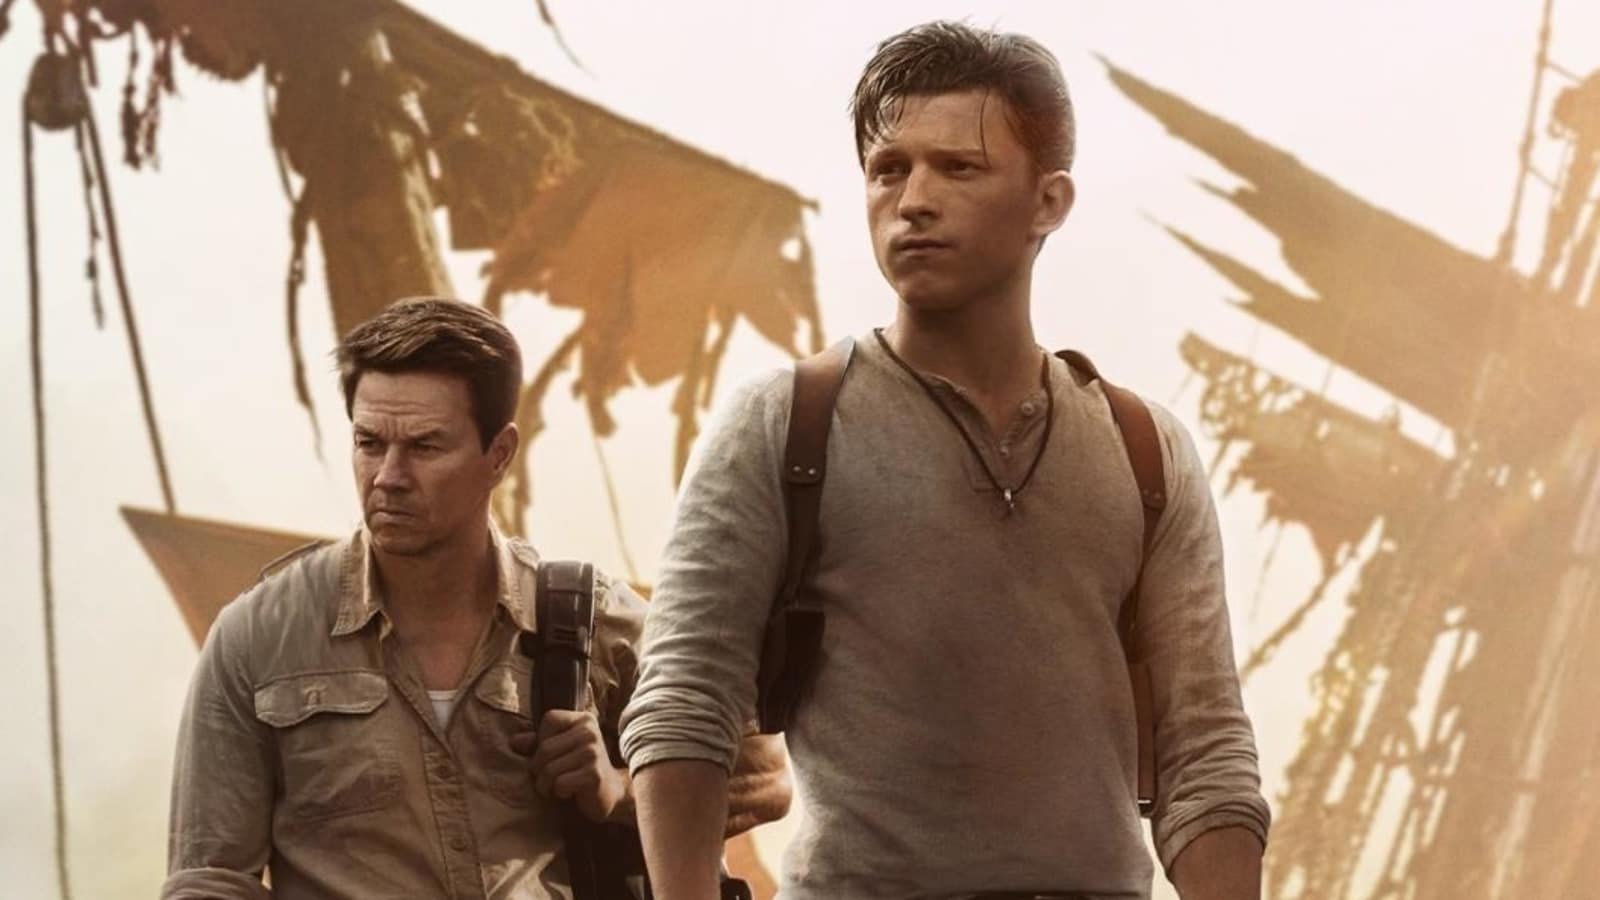 Tom Holland And Mark Wahlberg Search For Lost Treasure In New Trailer For Action Adventure Film Uncharted. Watch